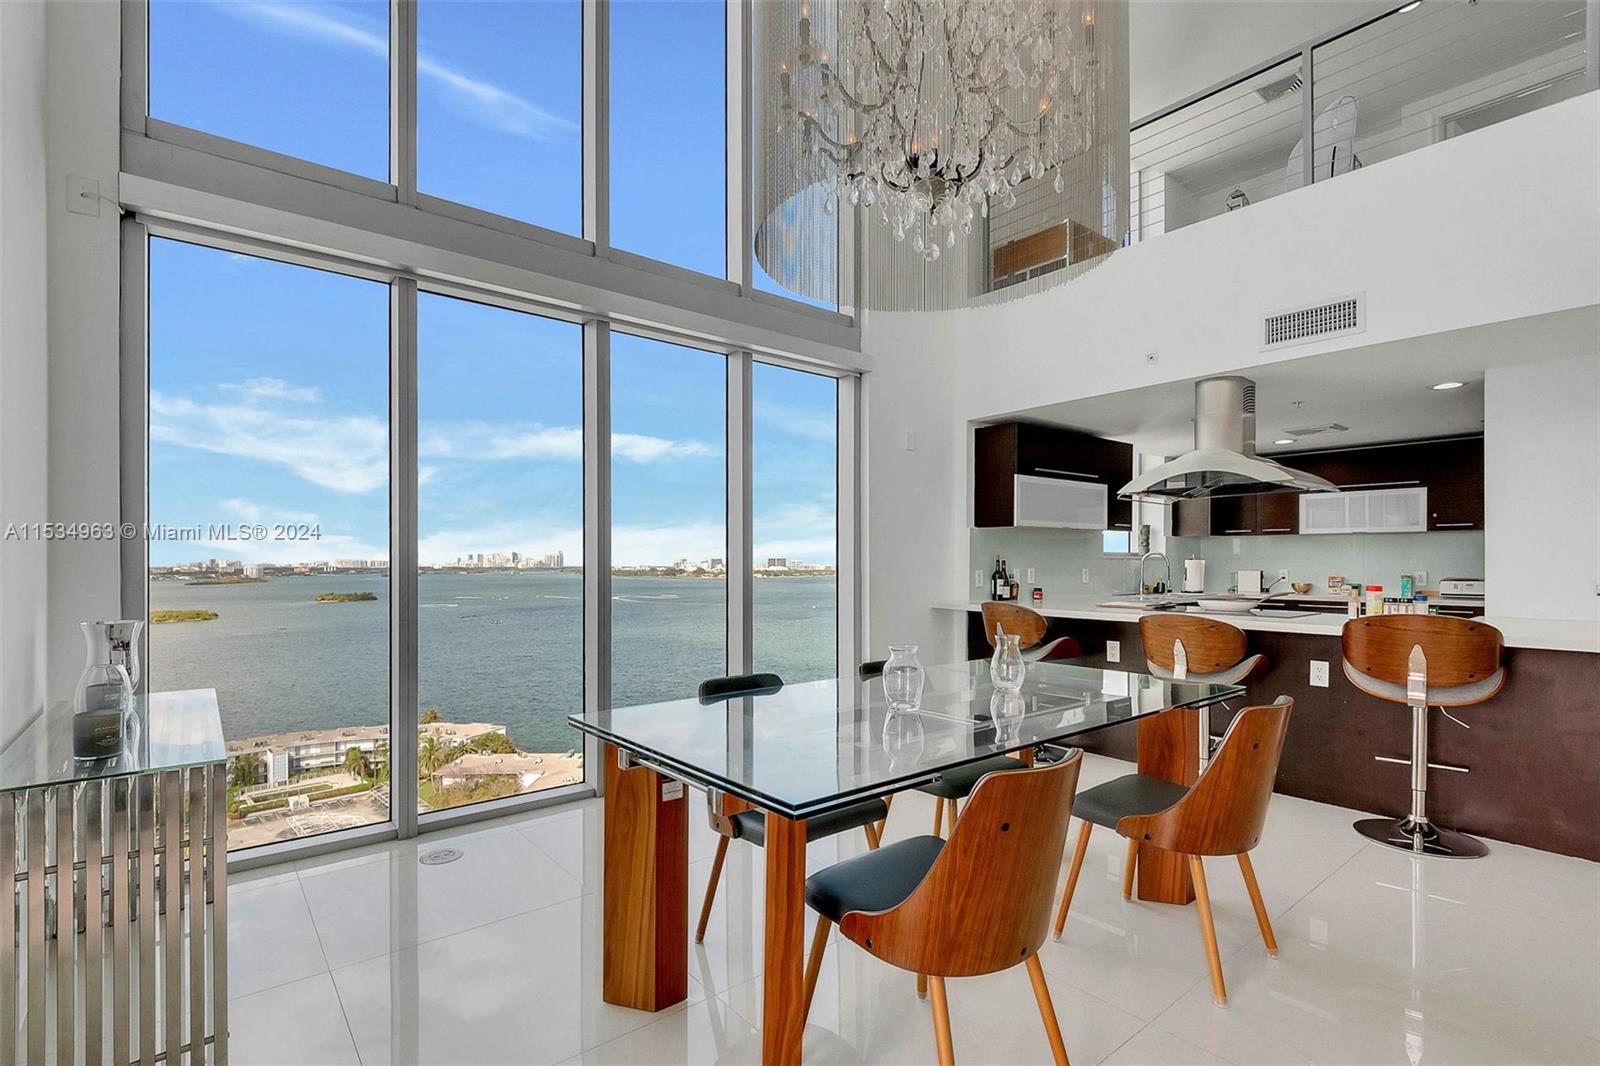 a room with stainless steel appliances kitchen island granite countertop dining table chairs and a view of living room